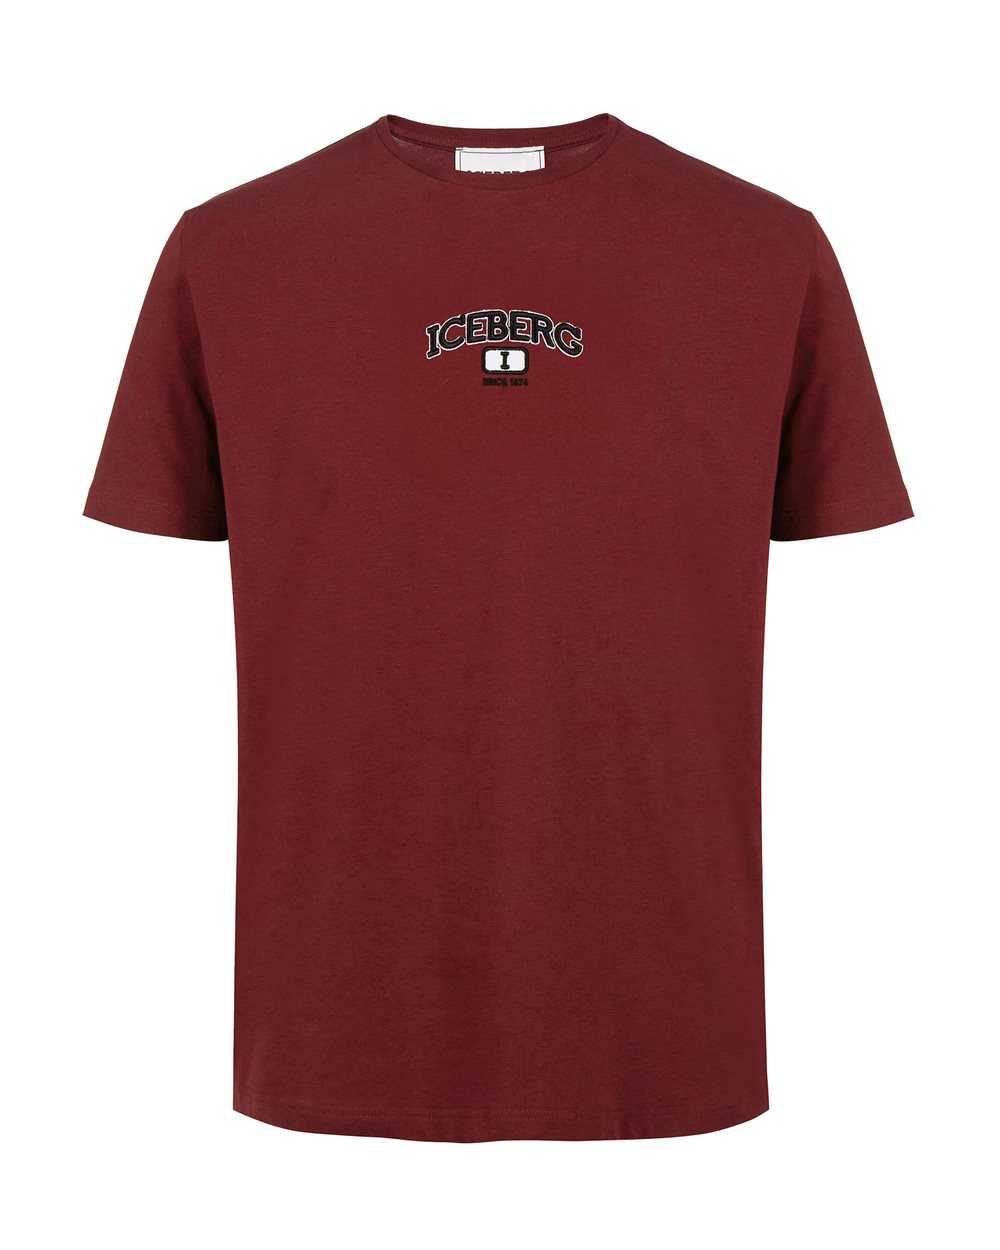 Bordeaux T-shirt with logo - Clothing | Iceberg - Official Website